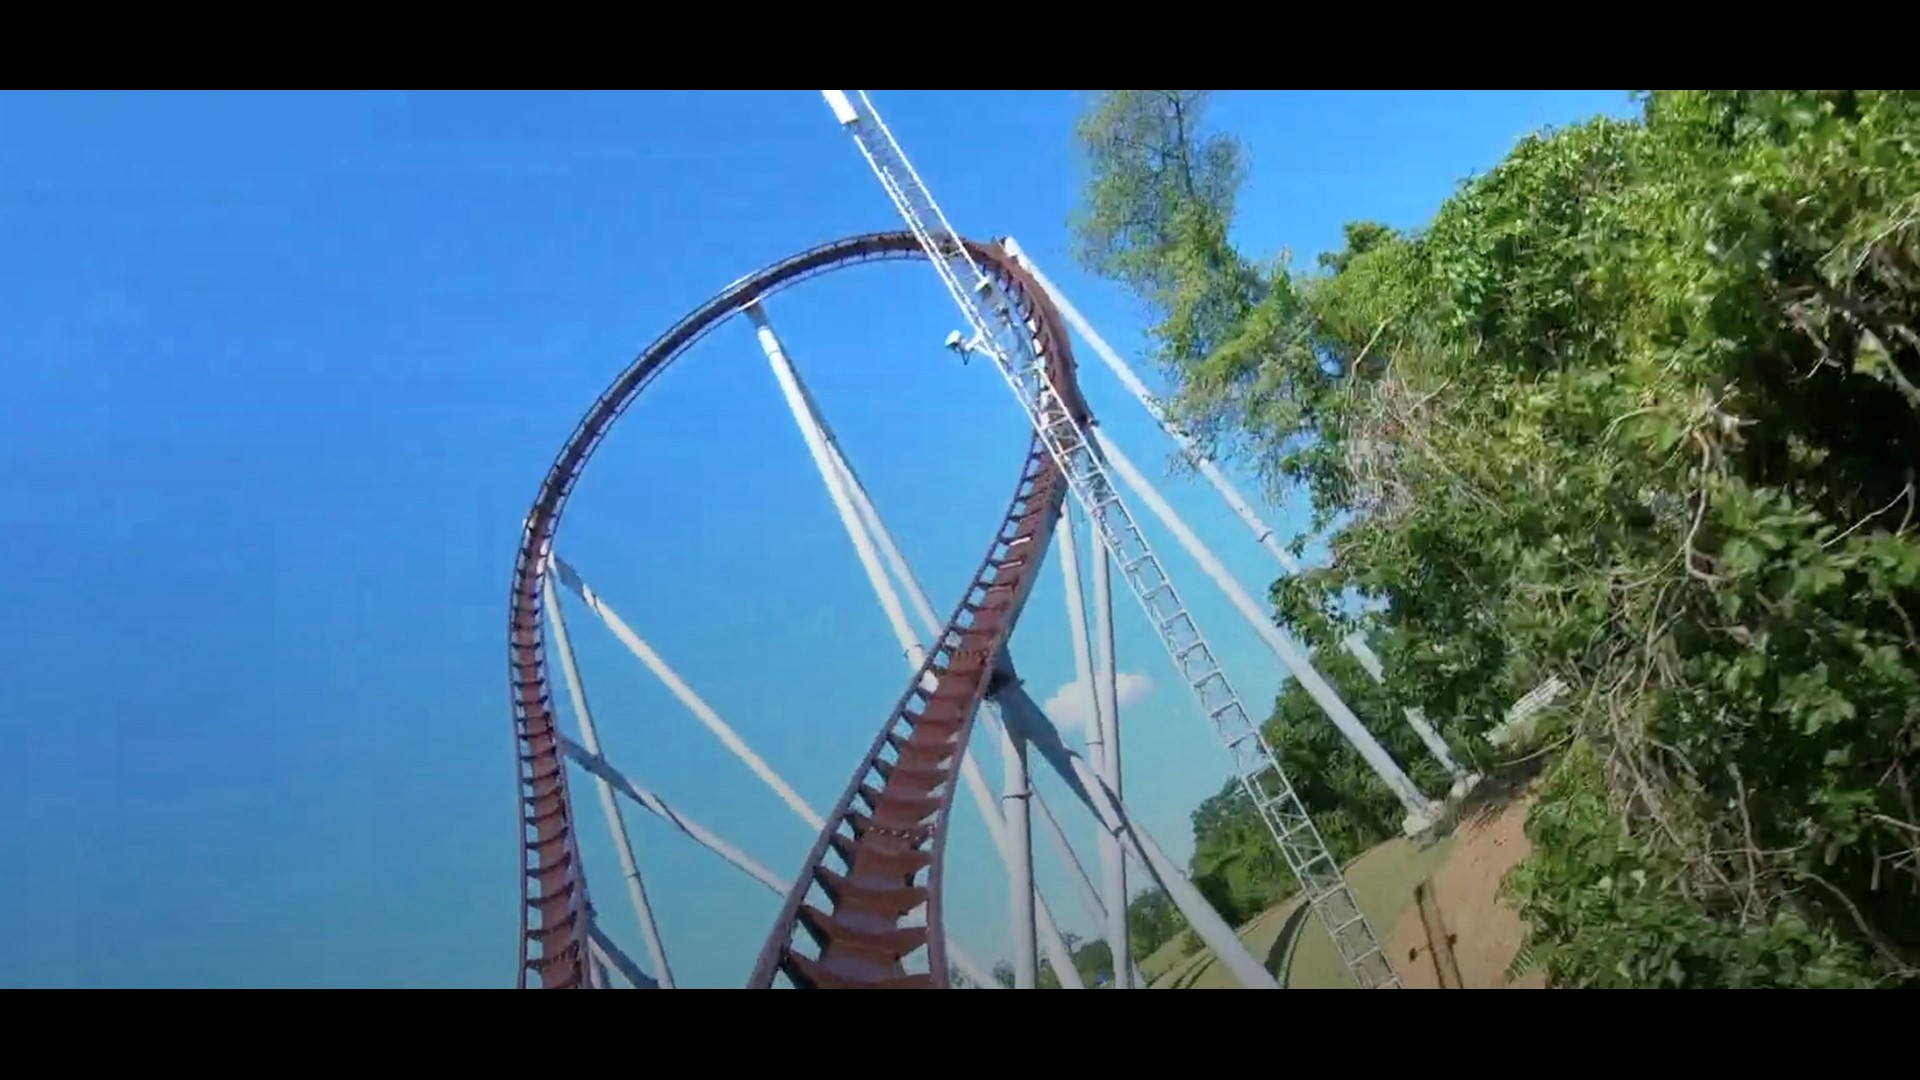 Hersheypark's new rollercoaster debuts to the public Friday